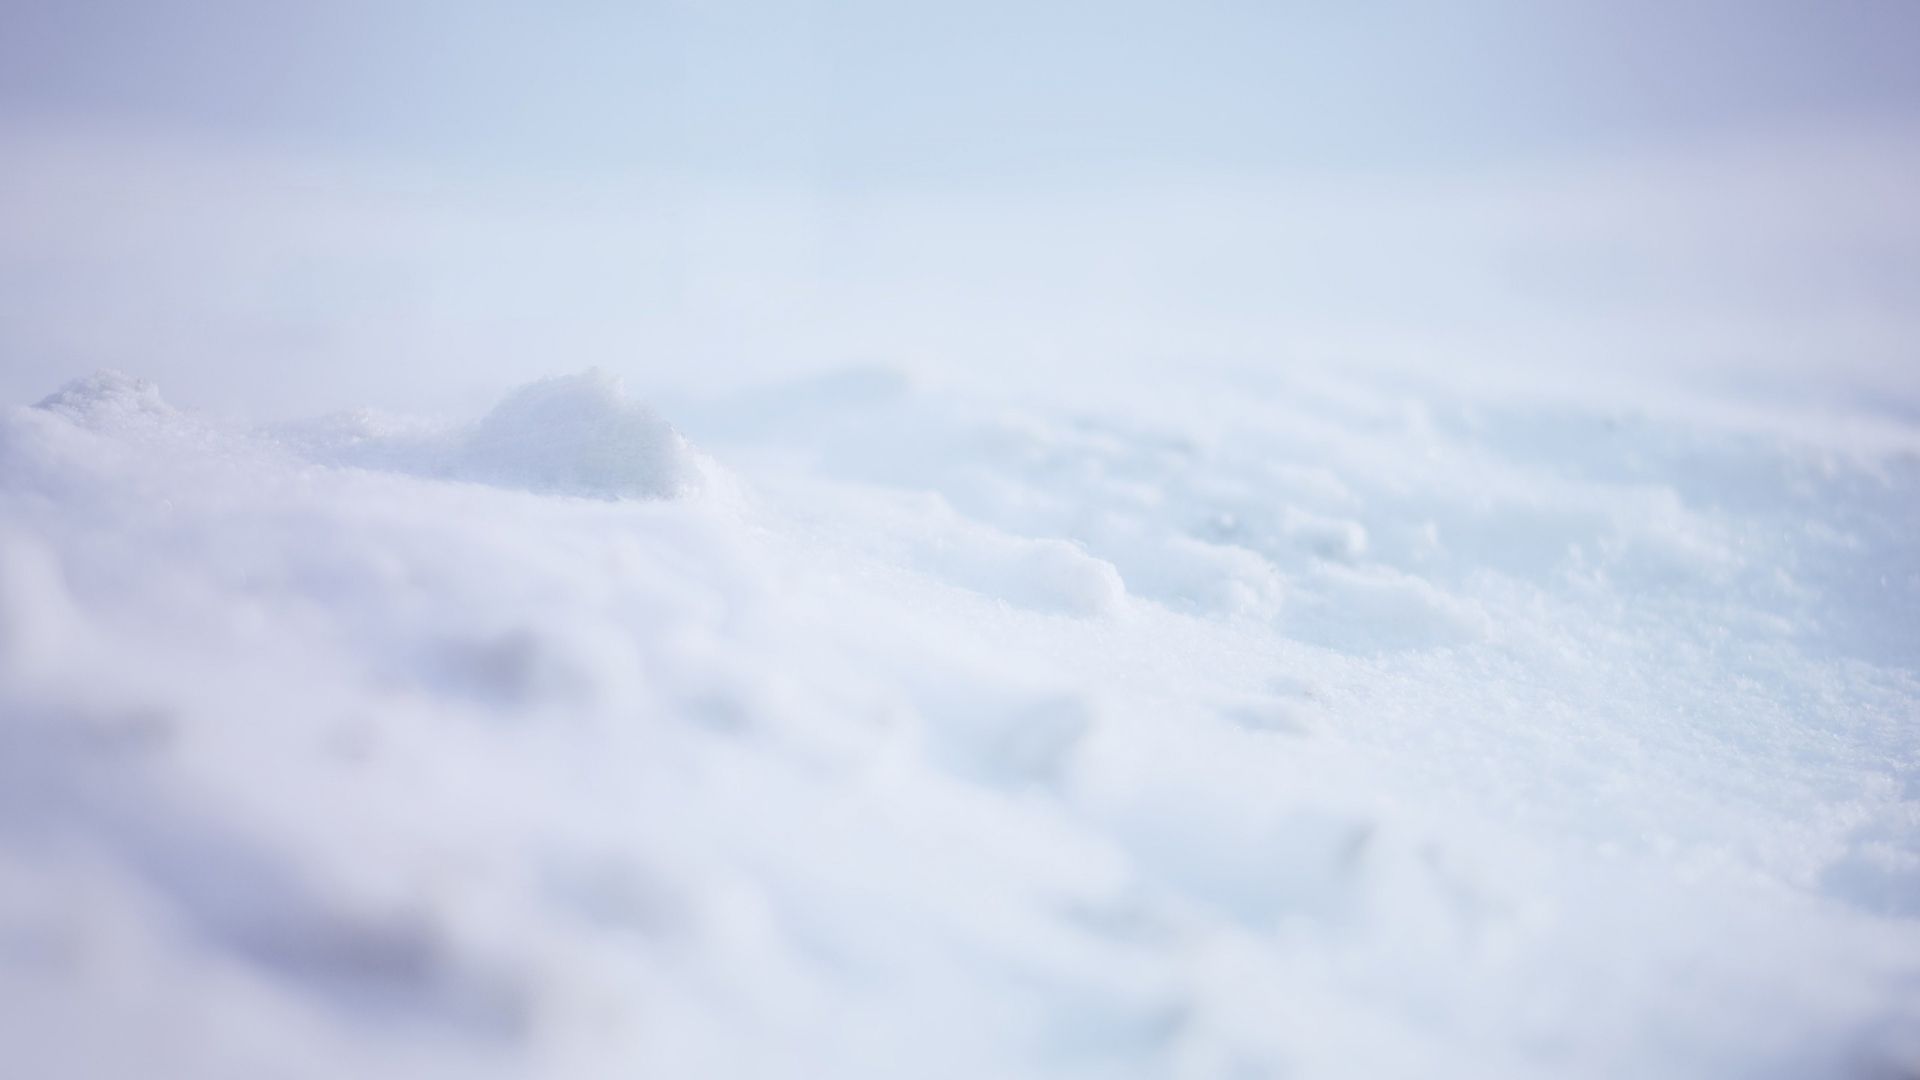 Download Wallpaper 1920x1080 snow, white, background, surface Full ...